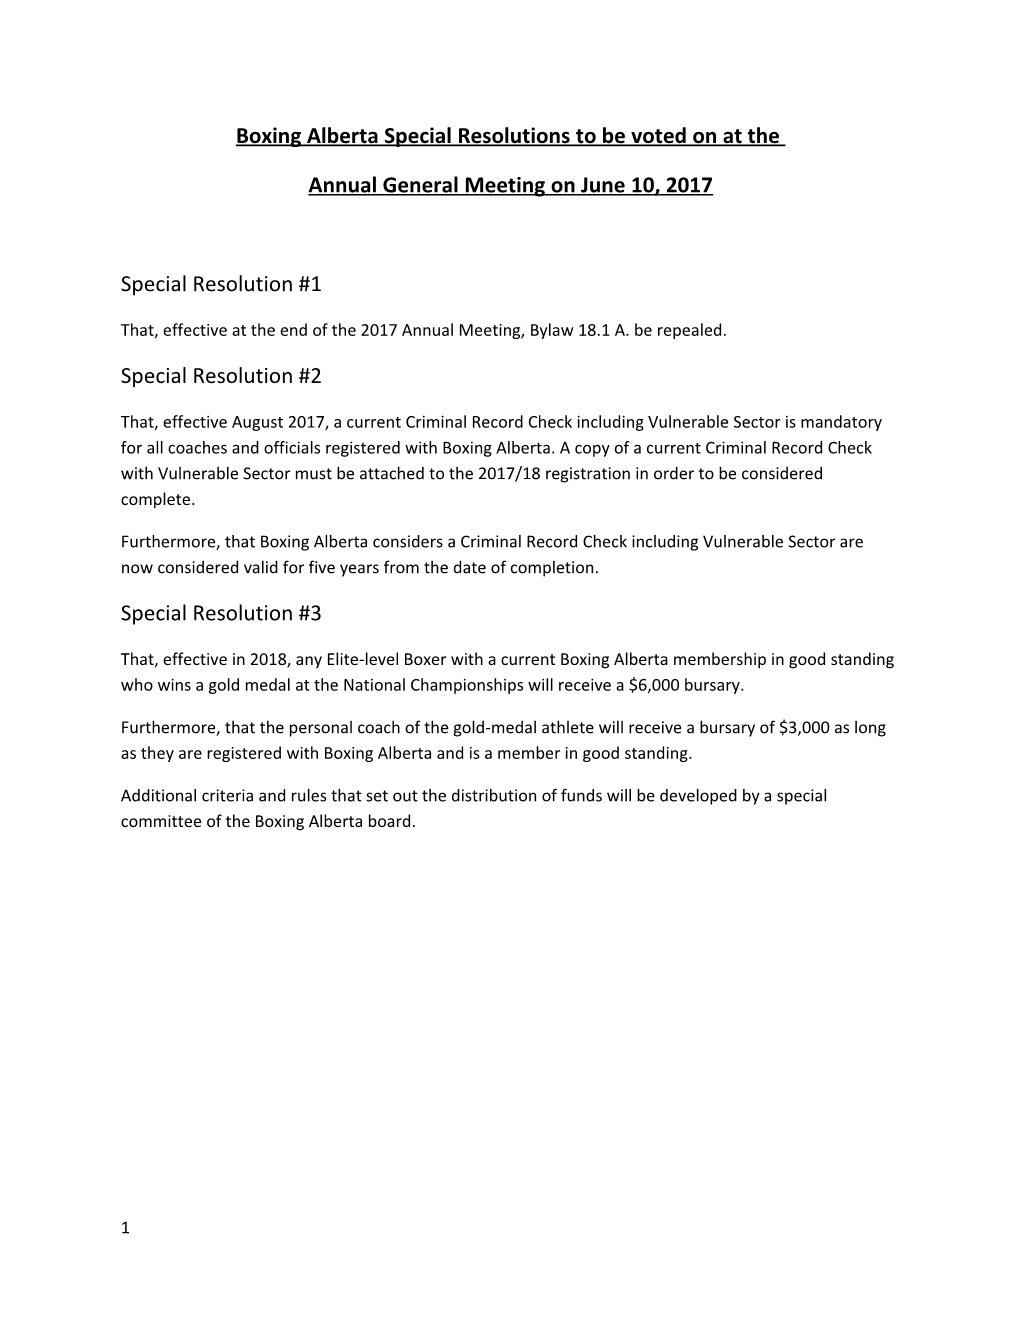 Boxing Alberta Special Resolutions to Be Voted on at The